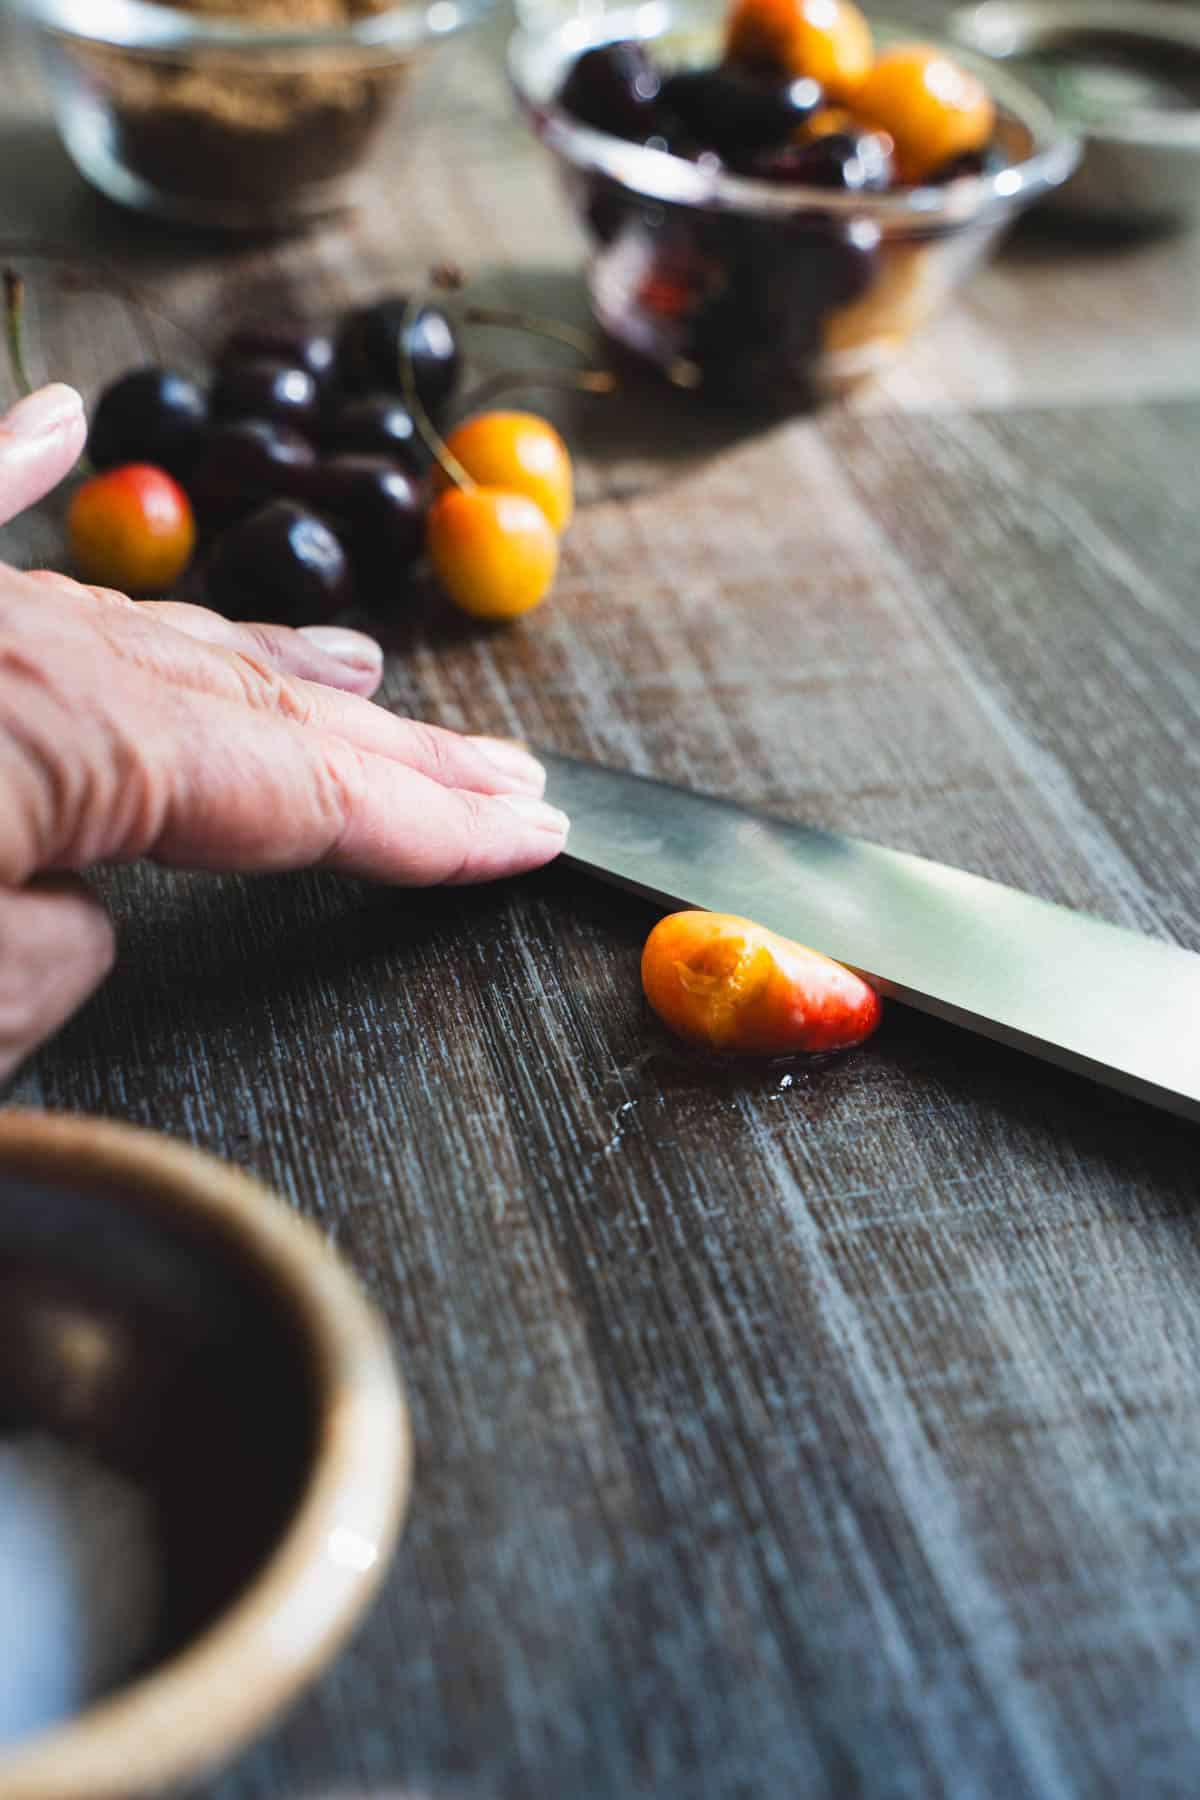 Chef's knife pressed down on a cherry smashing it with the flat edge.